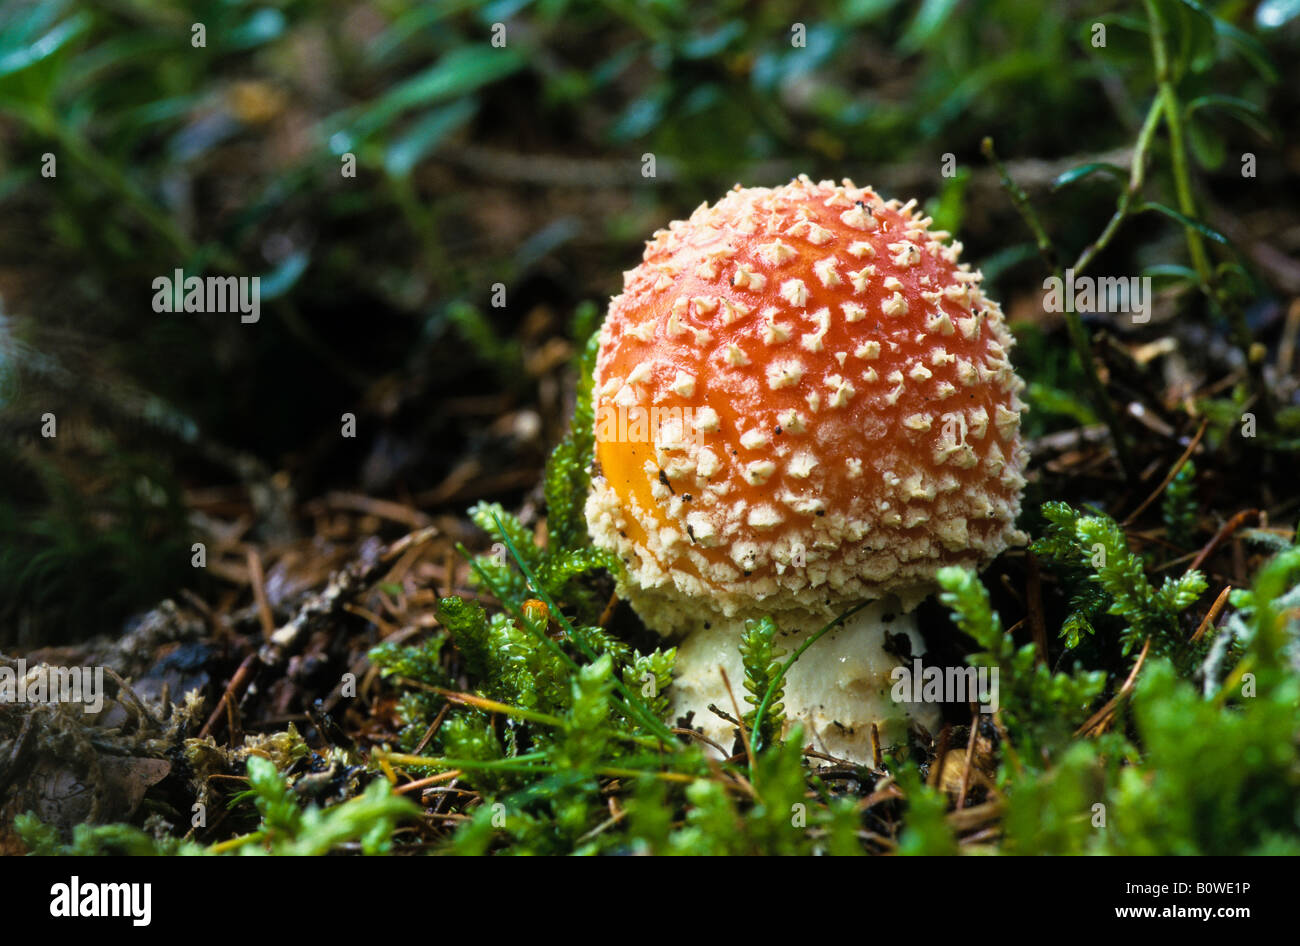 Agaric Fly champignons (Amanita muscaria) sur sol humide, forêt moussue Banque D'Images